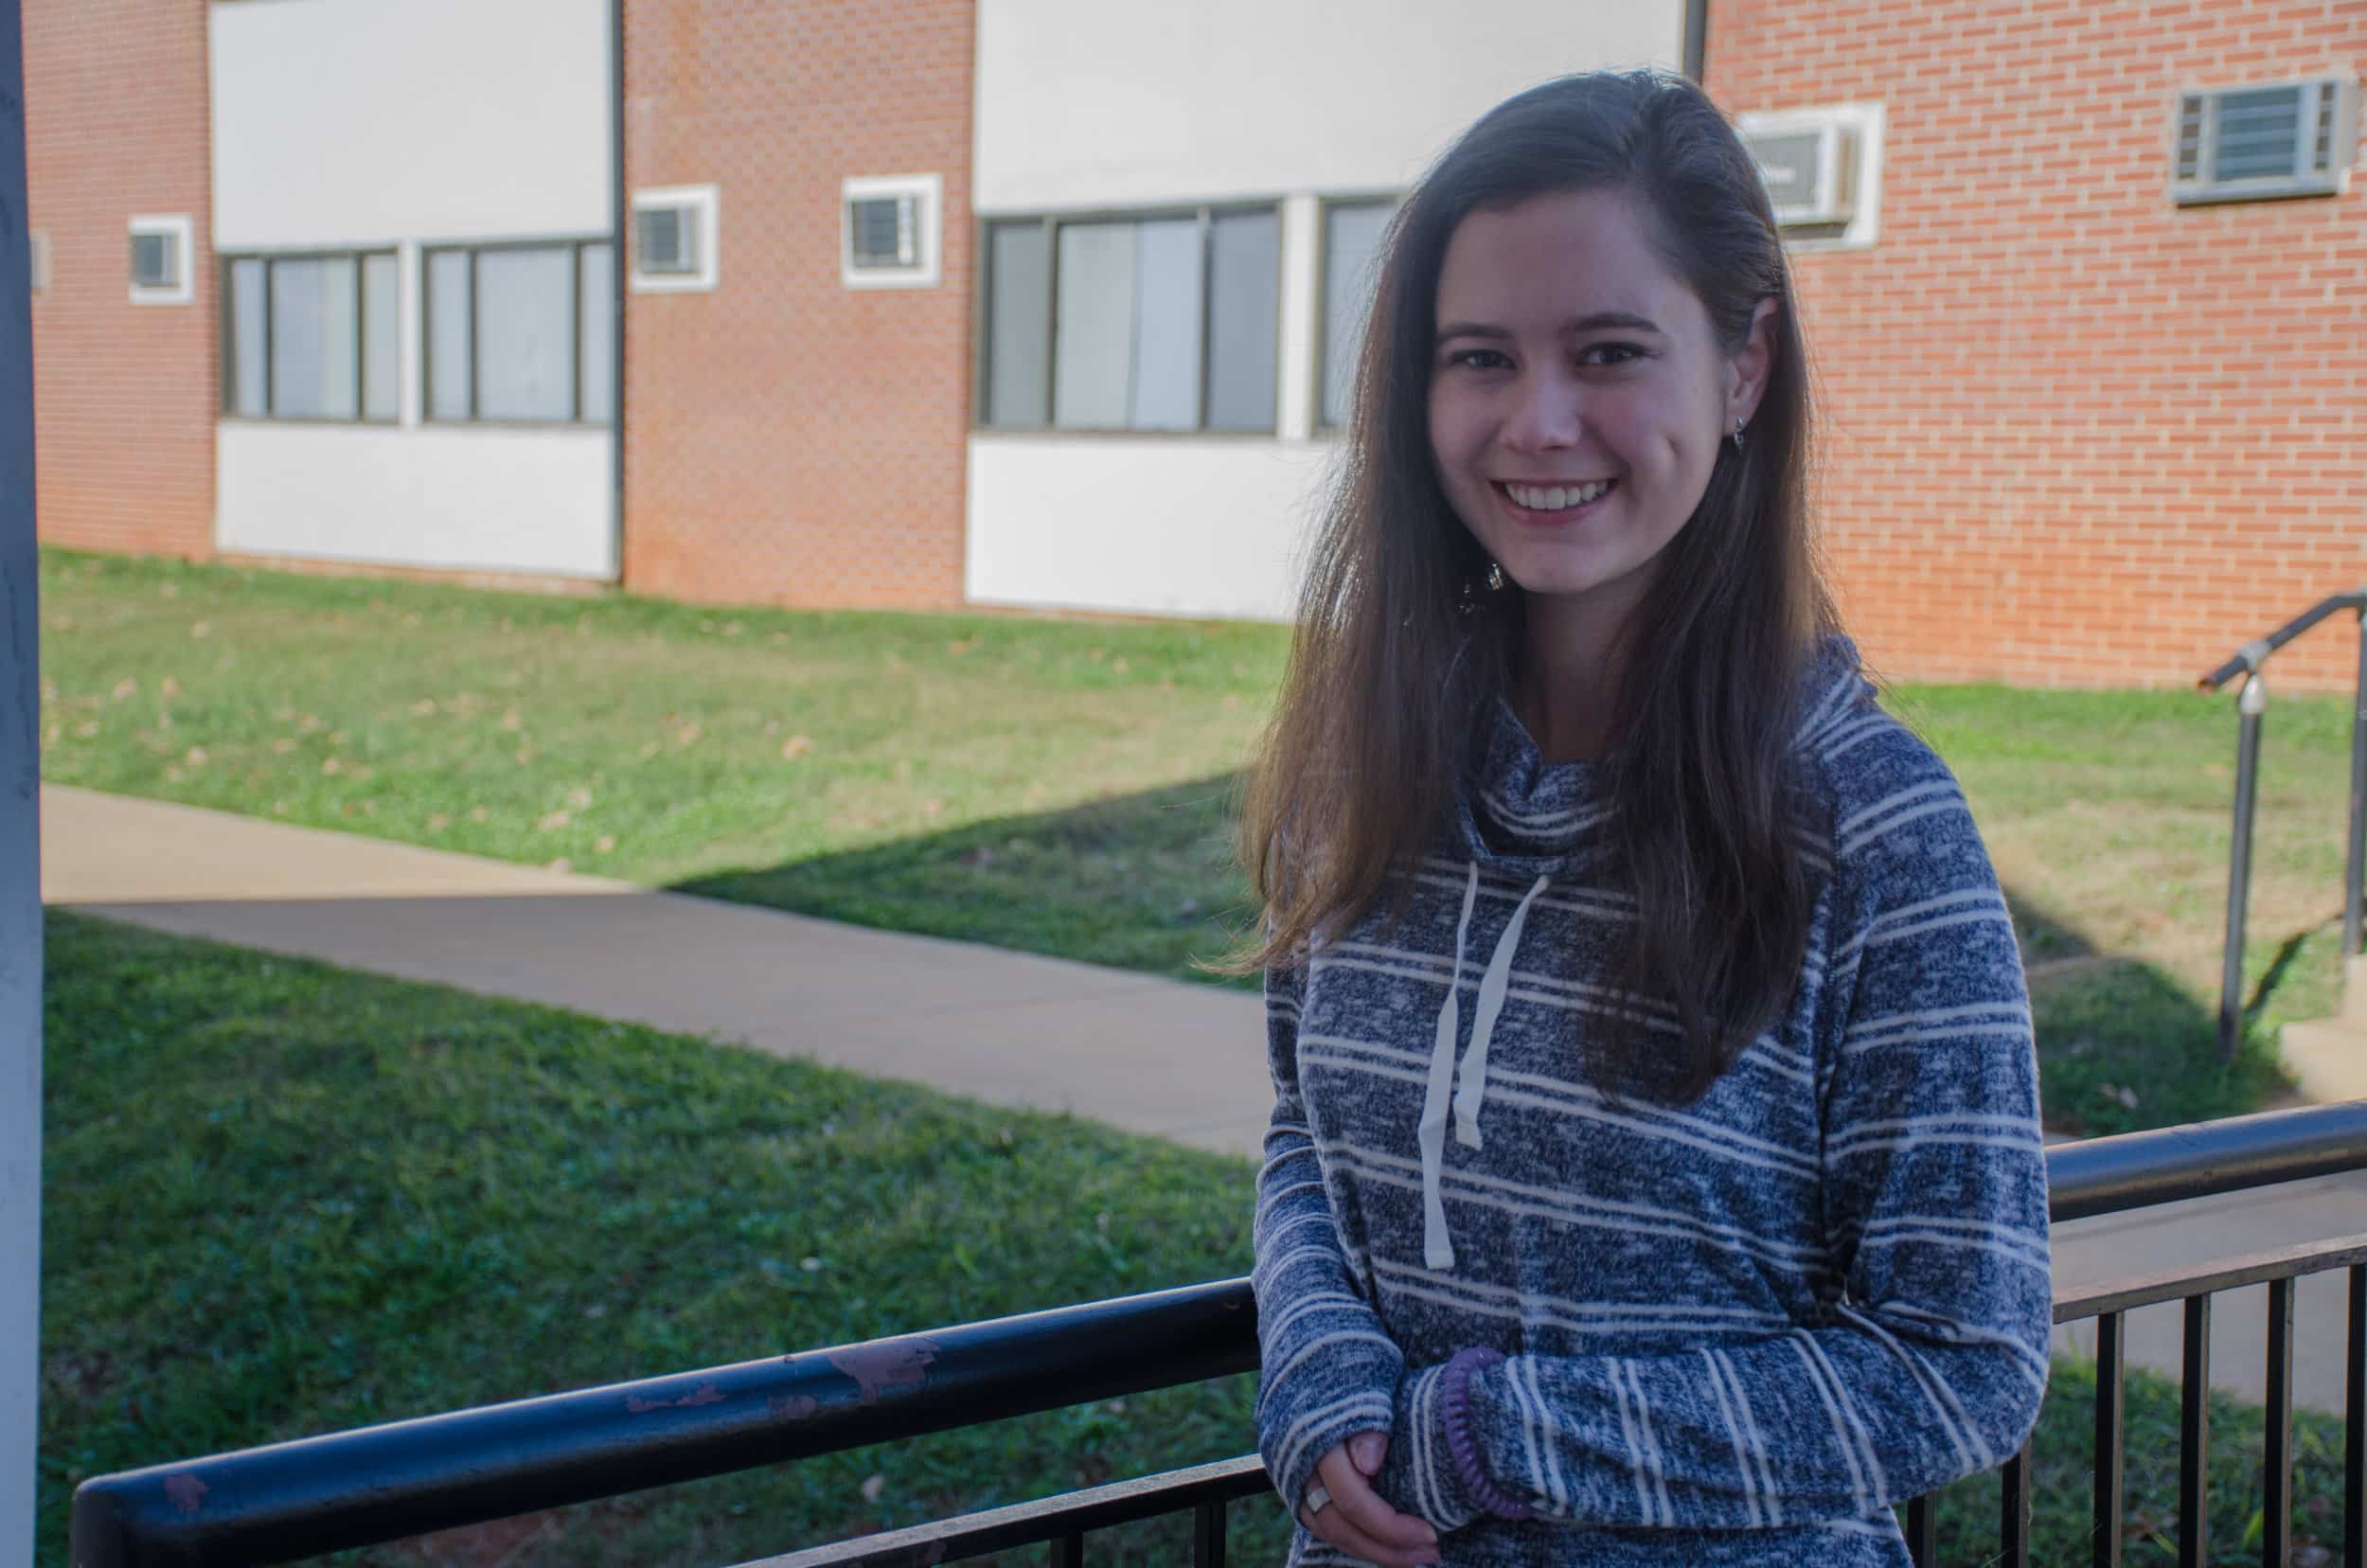 Nicole Seibel, sophomore elementary education major, "I'm thankful for my family because I don't get to see them as often so it's making me feel more grateful to have them in my life."